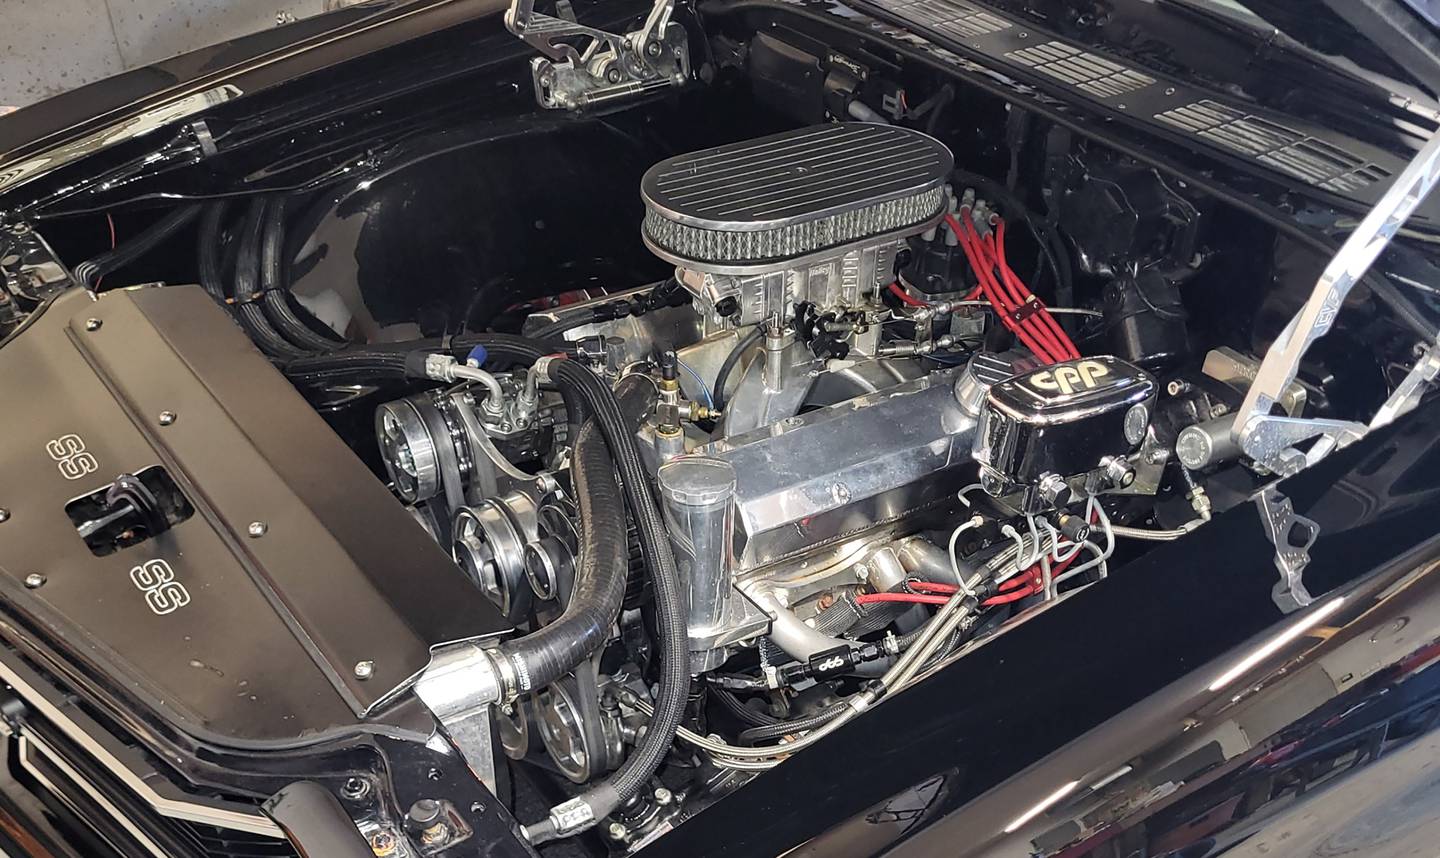 Photos by Rudy Host, Jr. - 1971 Chevelle SS Engine